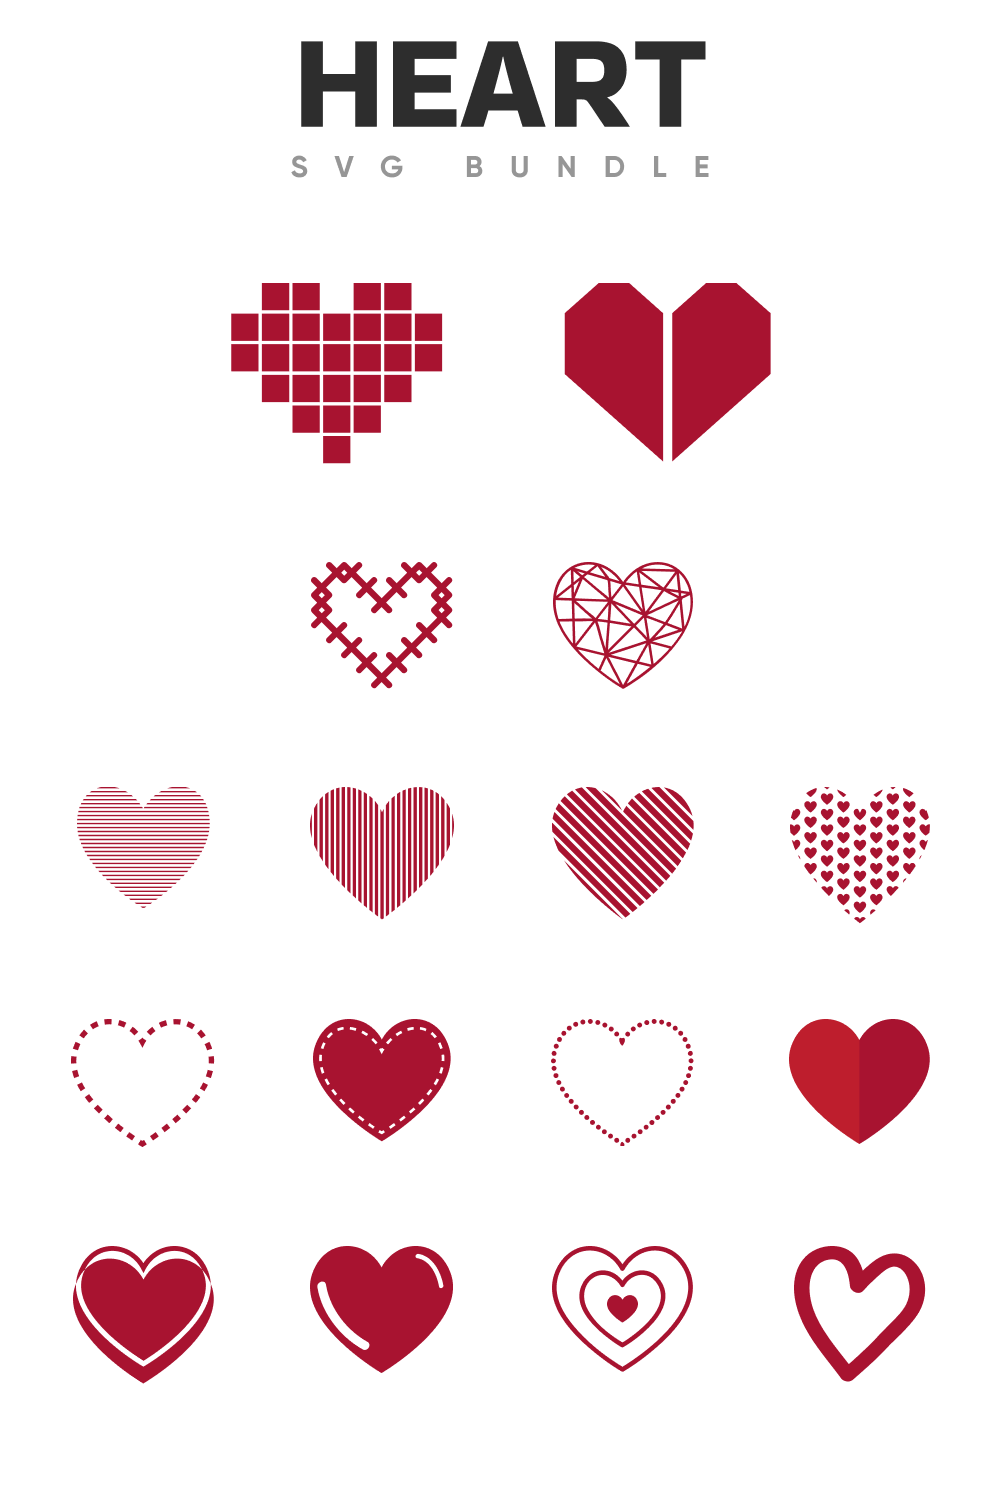 Diverse of hearts shapes.